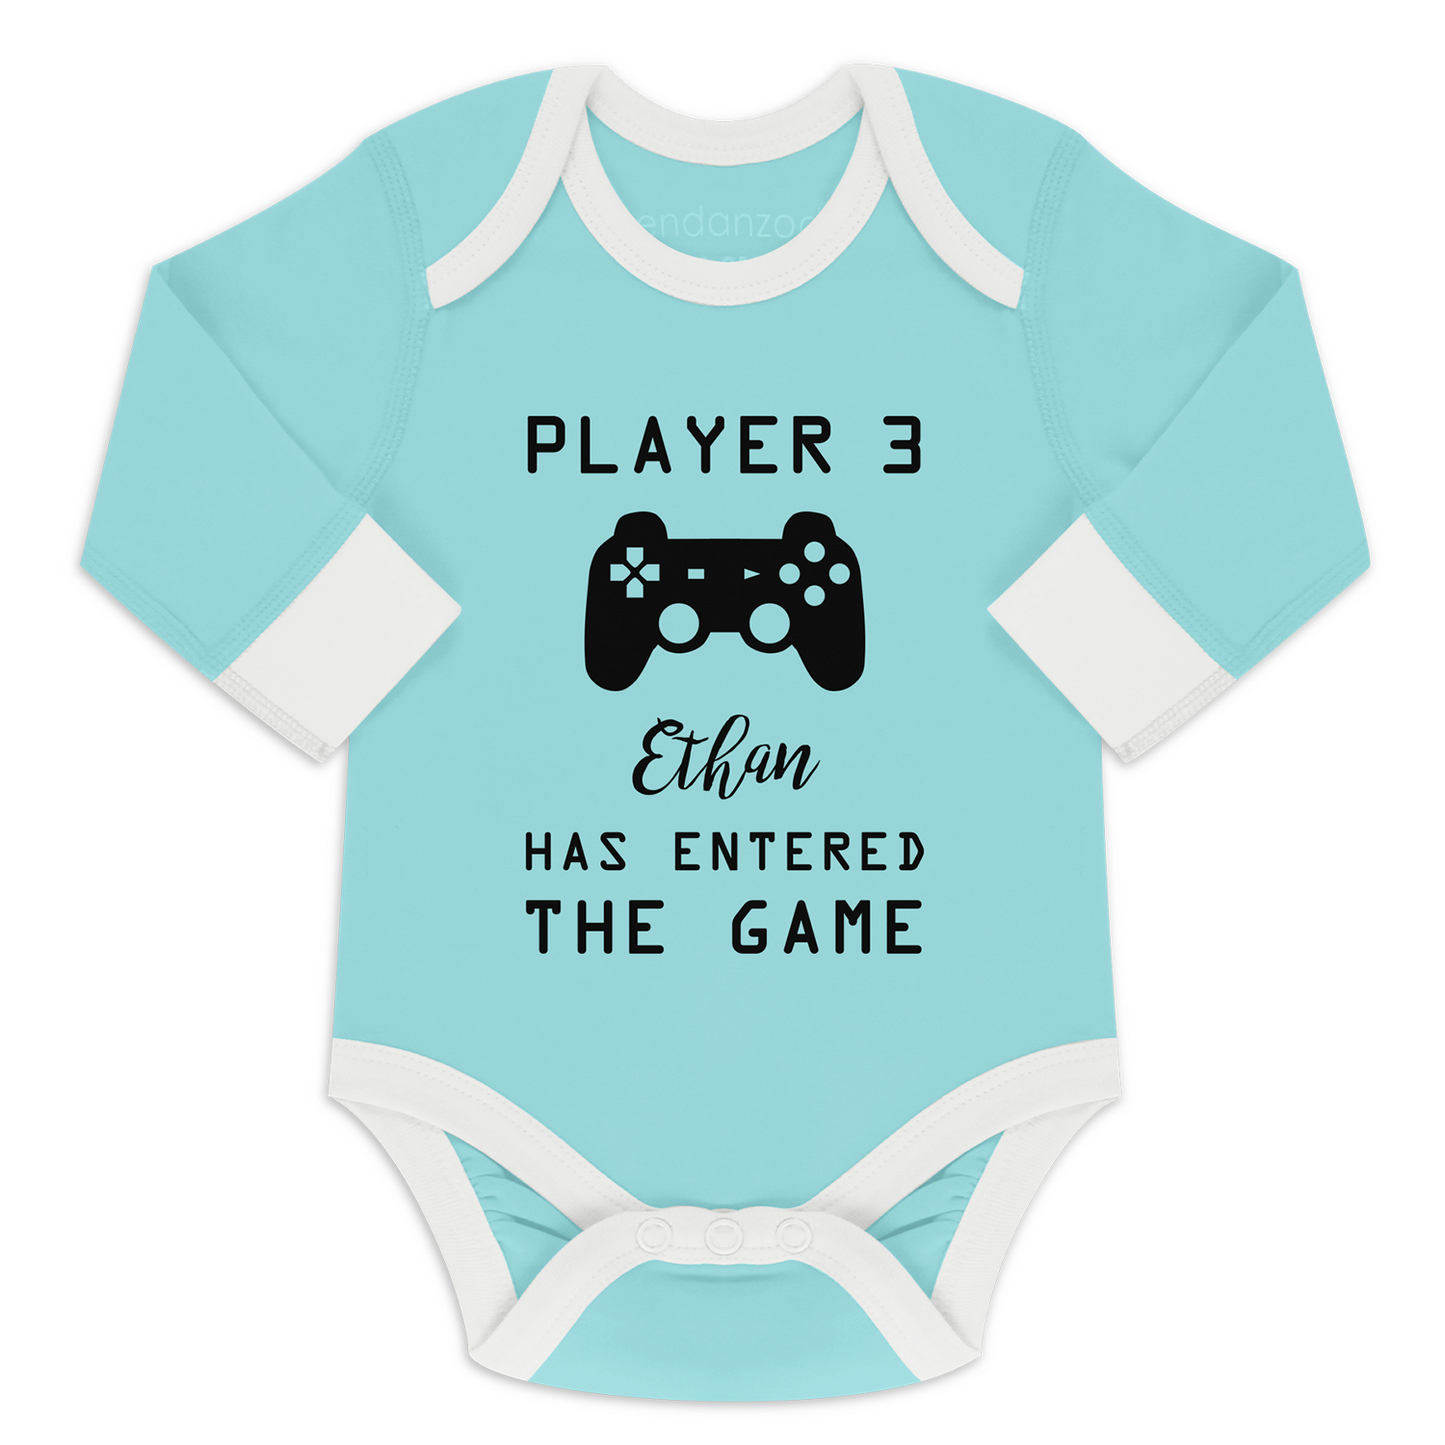 [Personalized] Endanzoo Pregnancy Announcement Organic Long Sleeve Baby Bodysuit - Player 3